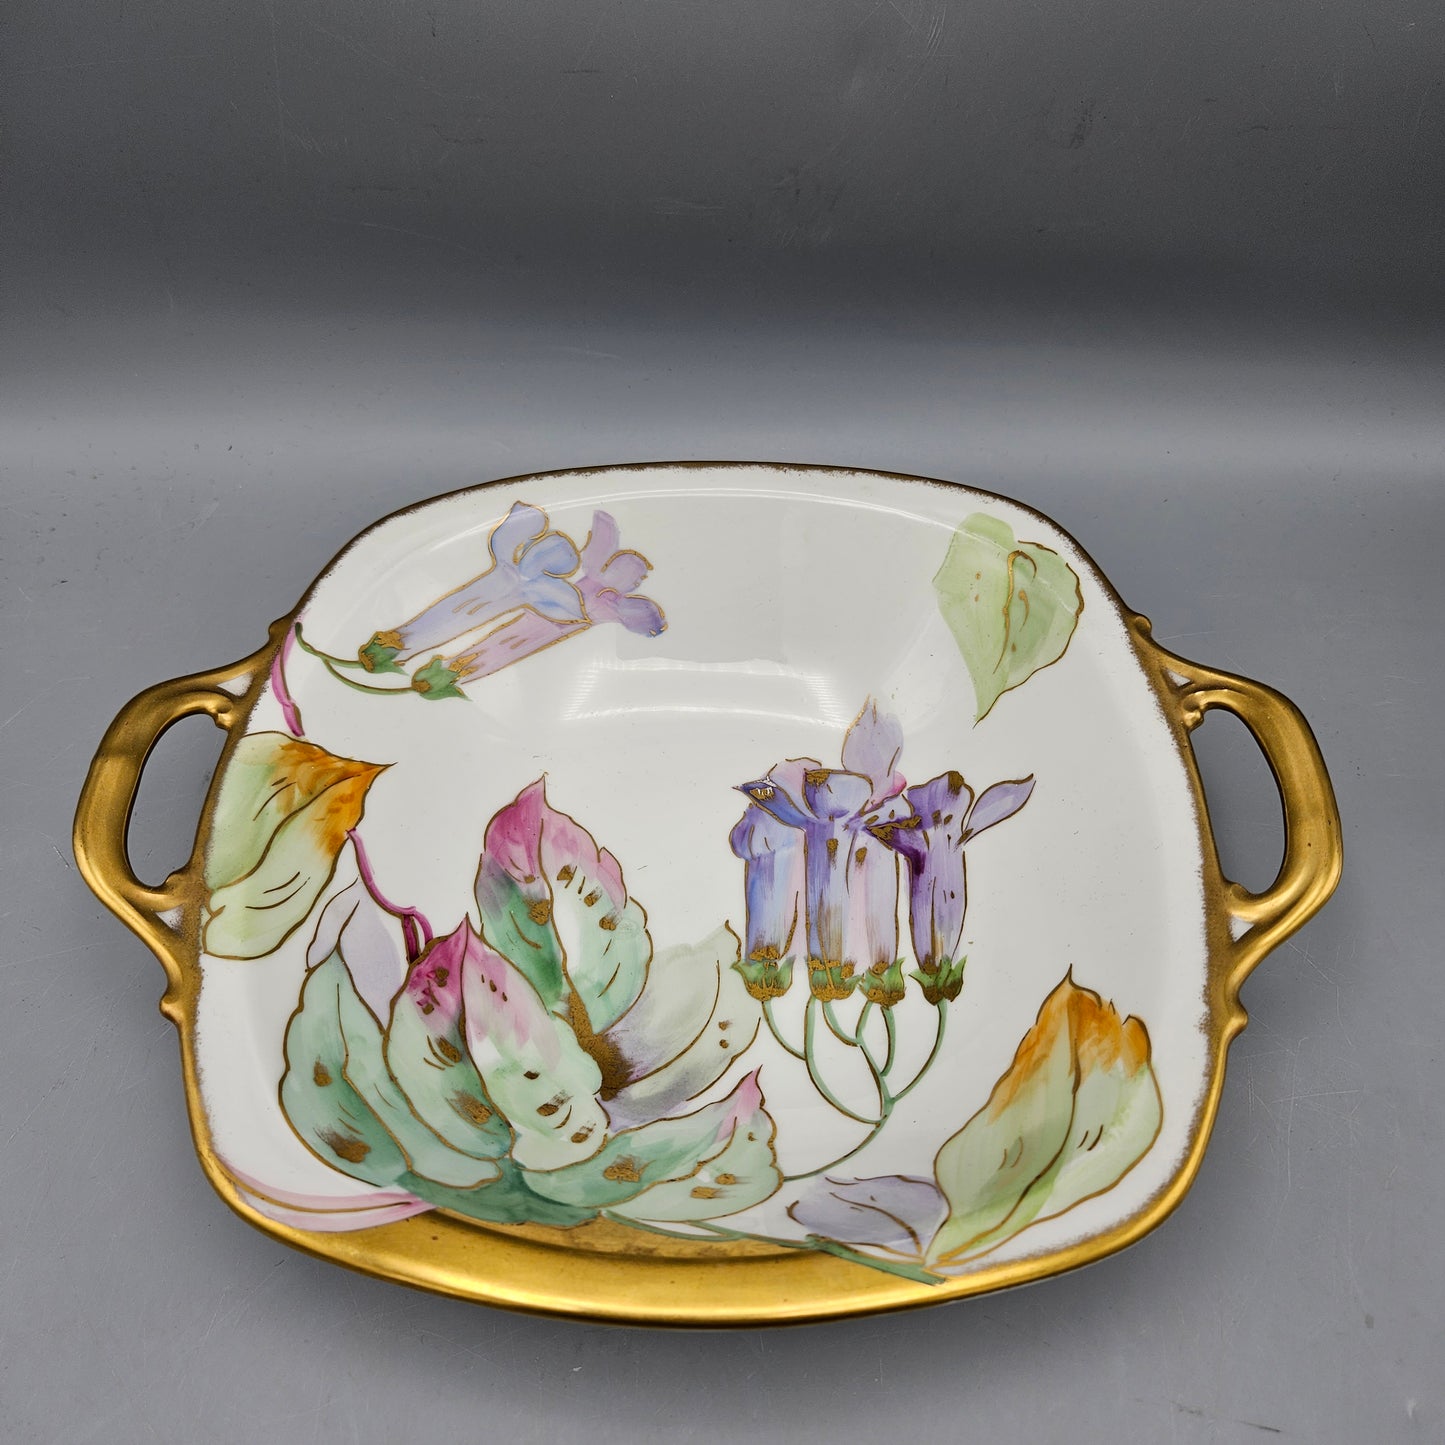 Hand-Painted Limoges Porcelain Handled Dish